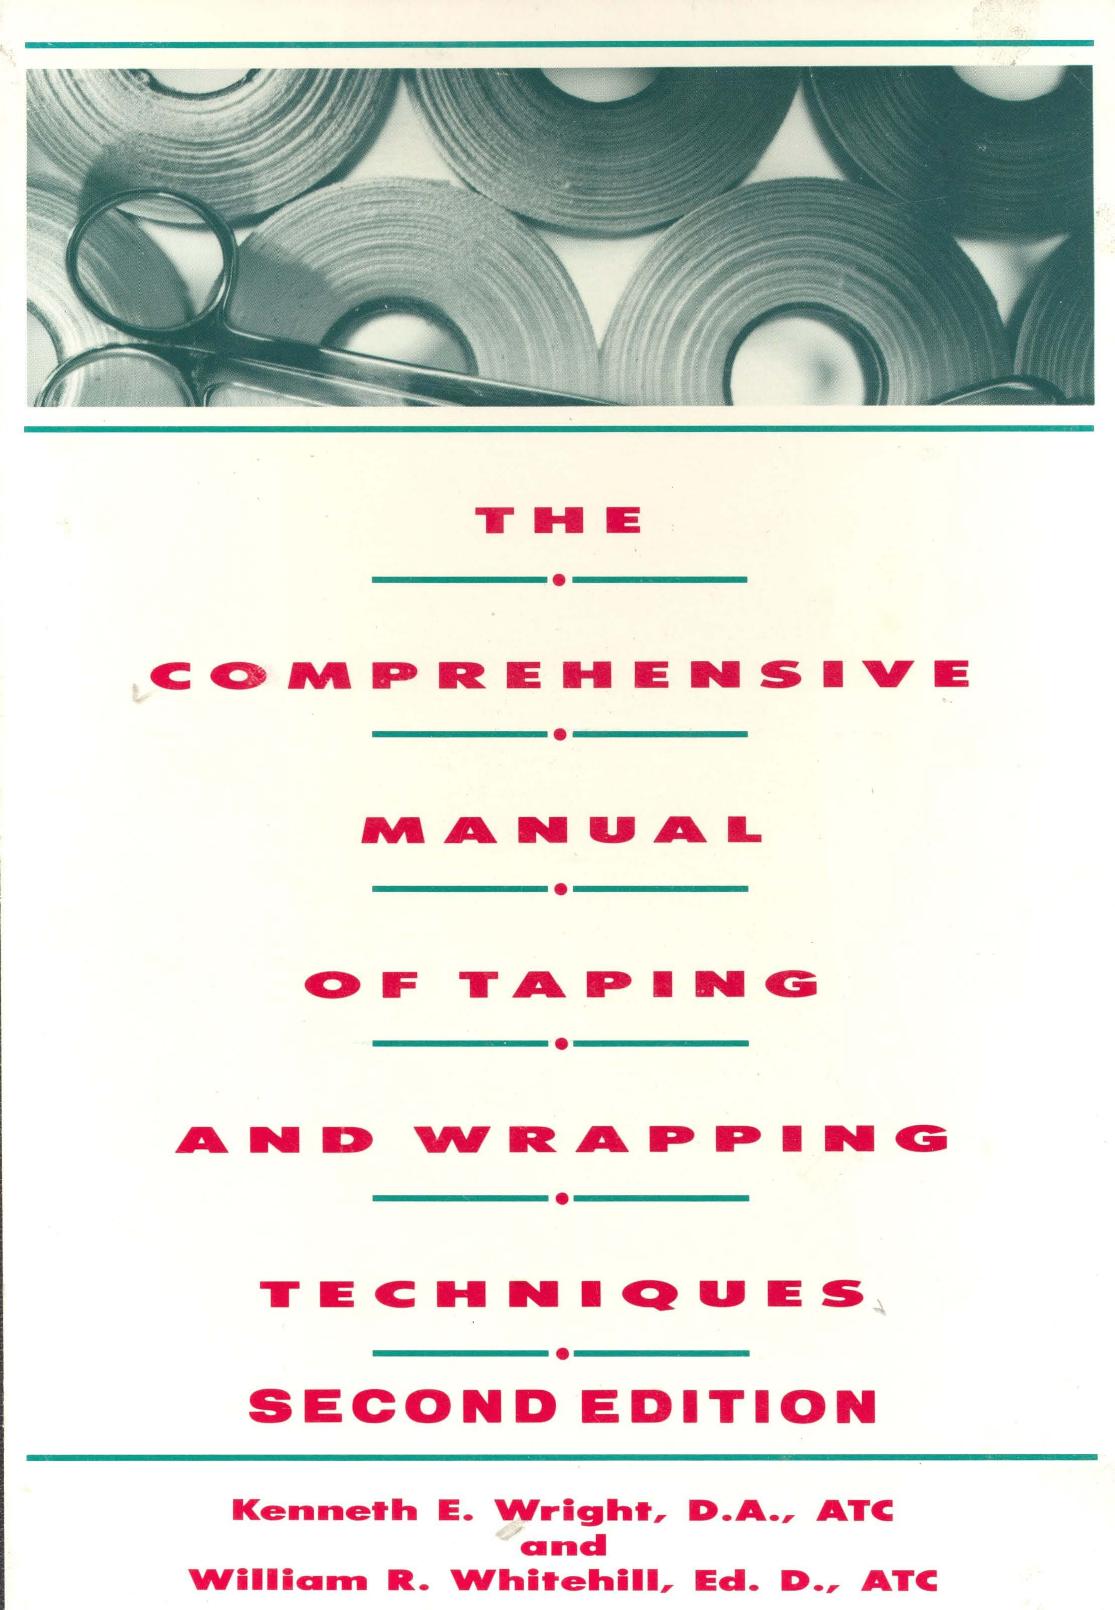 Comprehensive Manual of Taping and Wrapping-2nd Edition